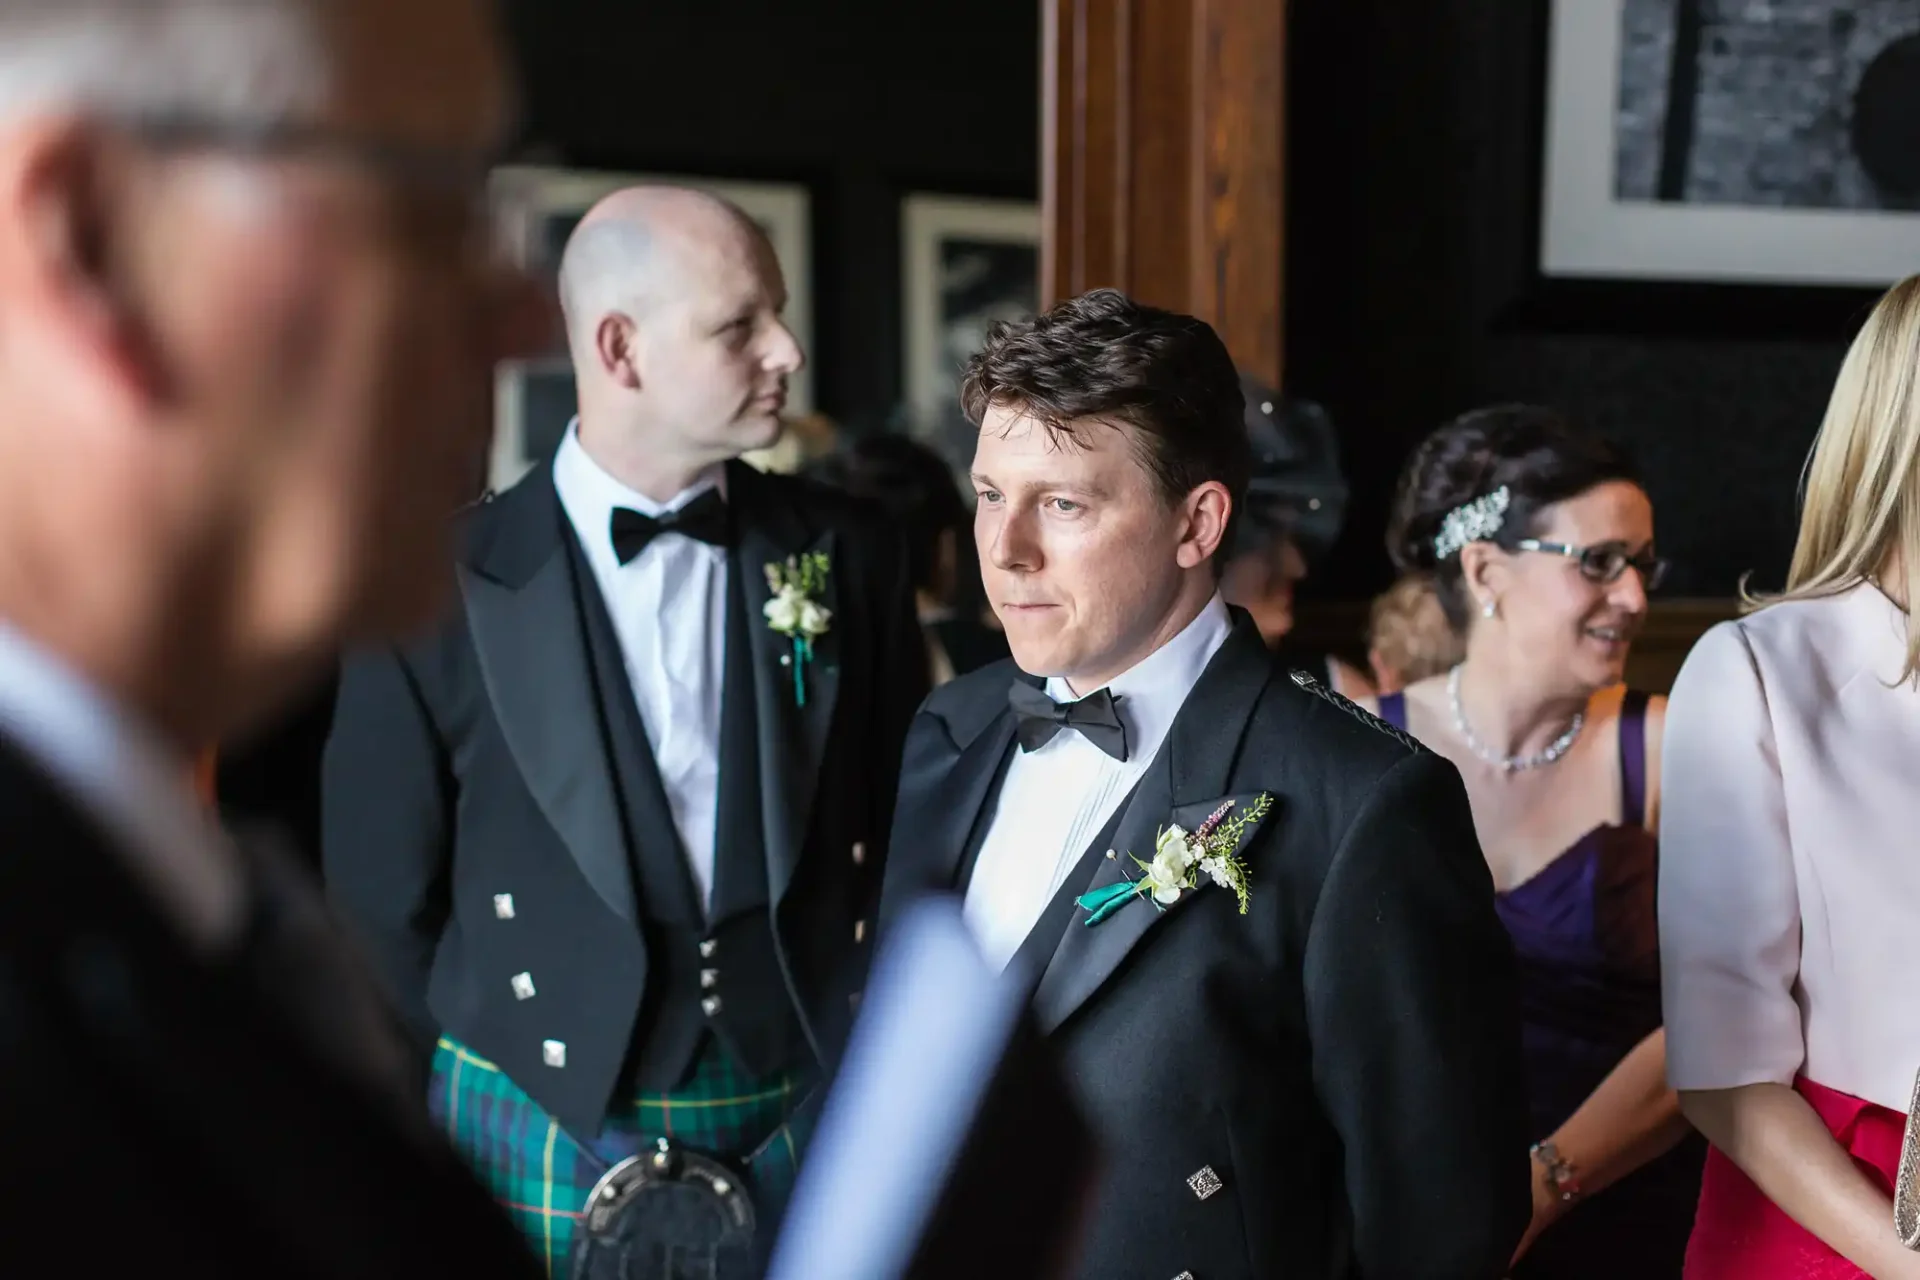 Groom in a black tuxedo looks thoughtful at a wedding reception, surrounded by guests including a man in a kilt.